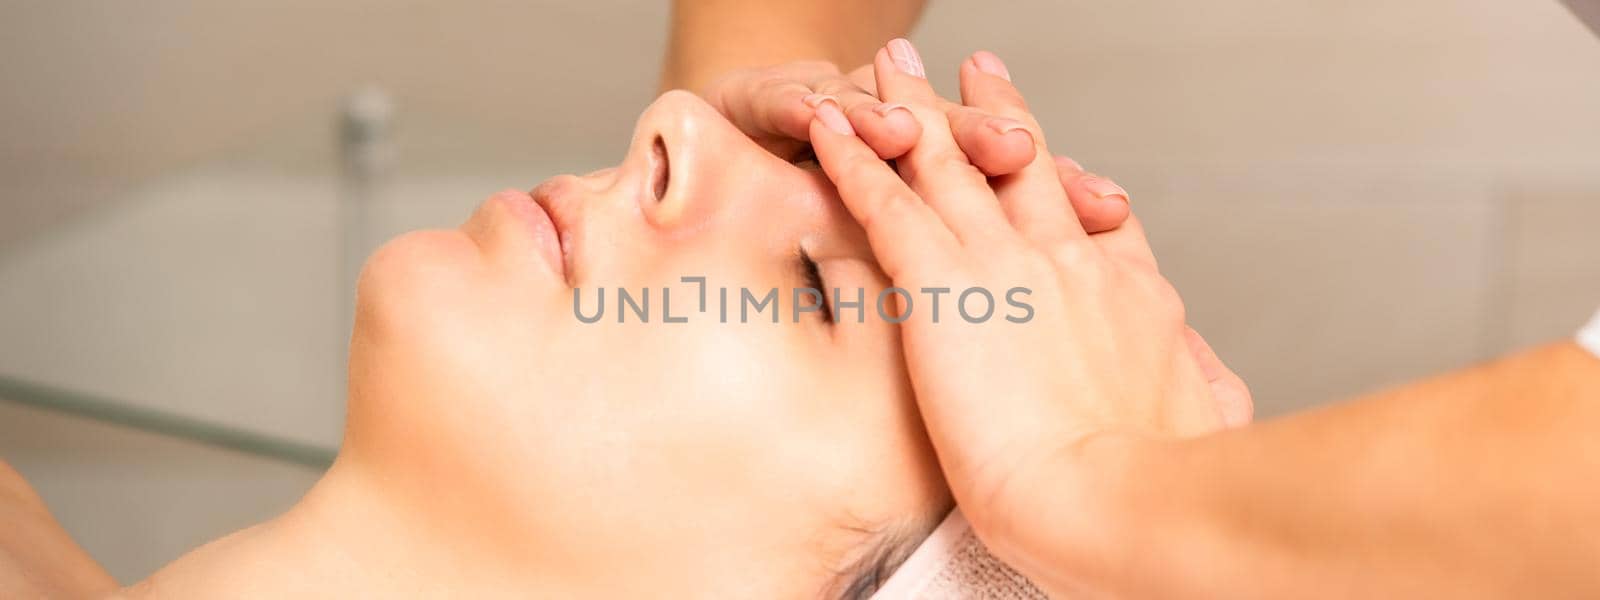 Facial massage. Young caucasian woman with closed eyes getting a massage on her forehead in a beauty salon